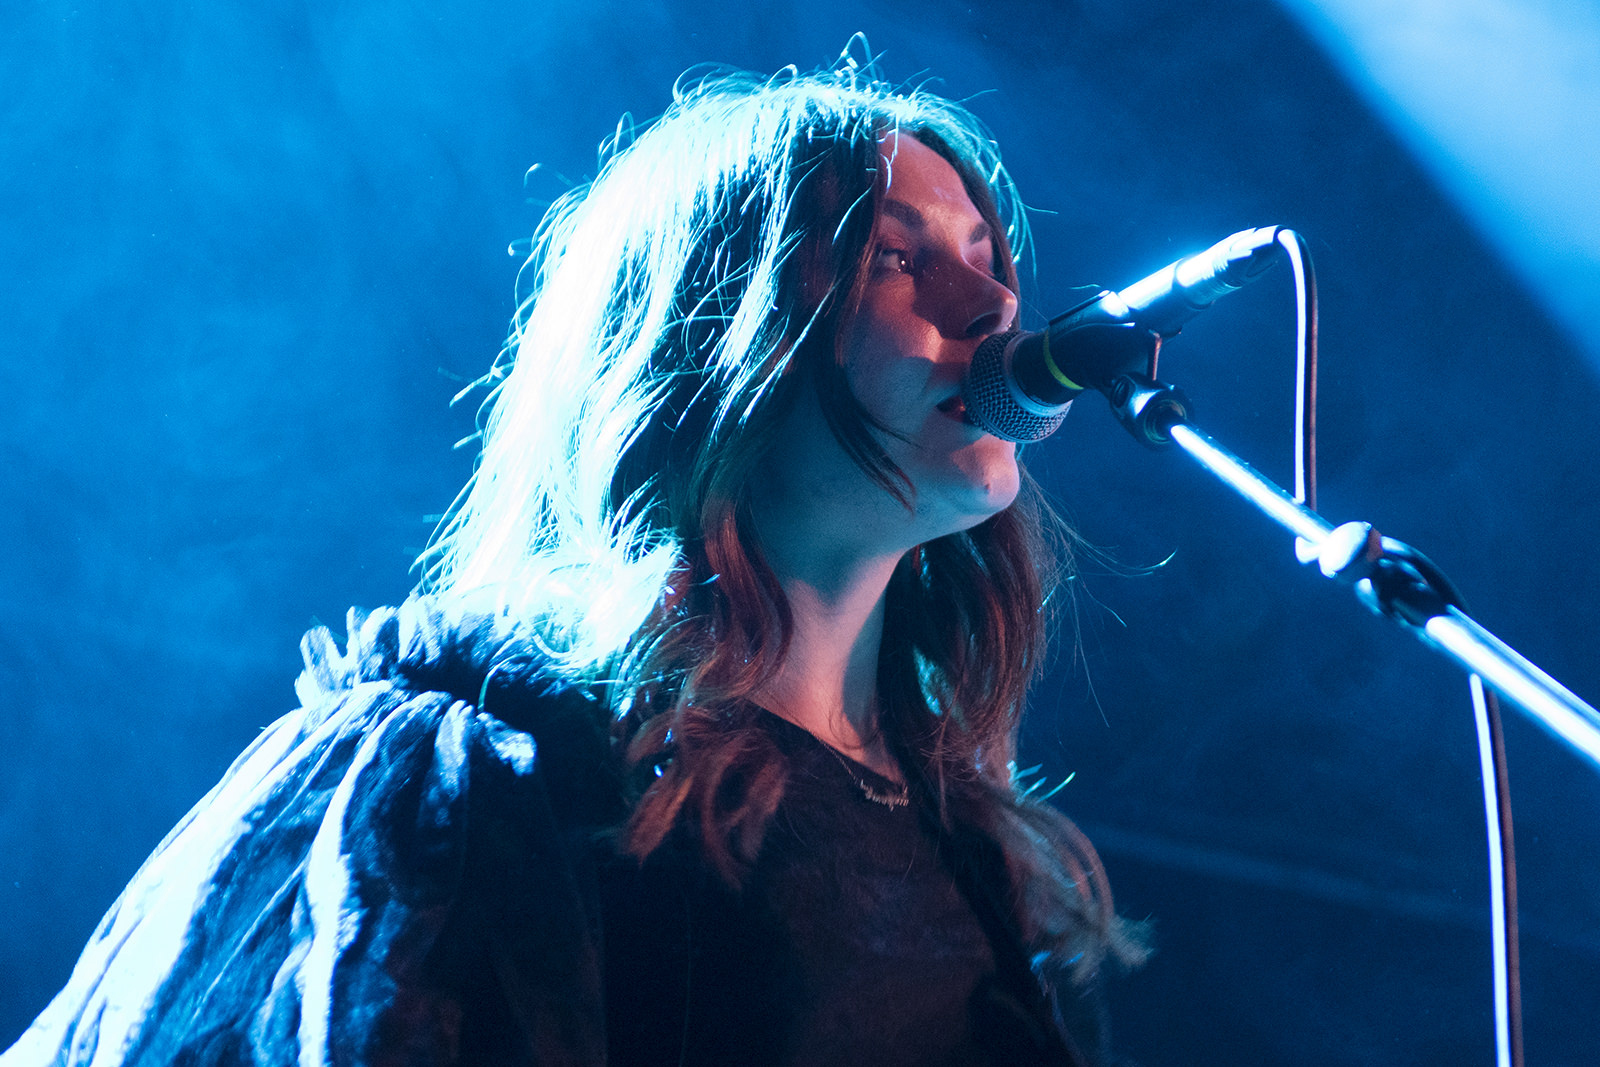 Honeyblood on stage at the QMU Glasgow on 24 October 2019